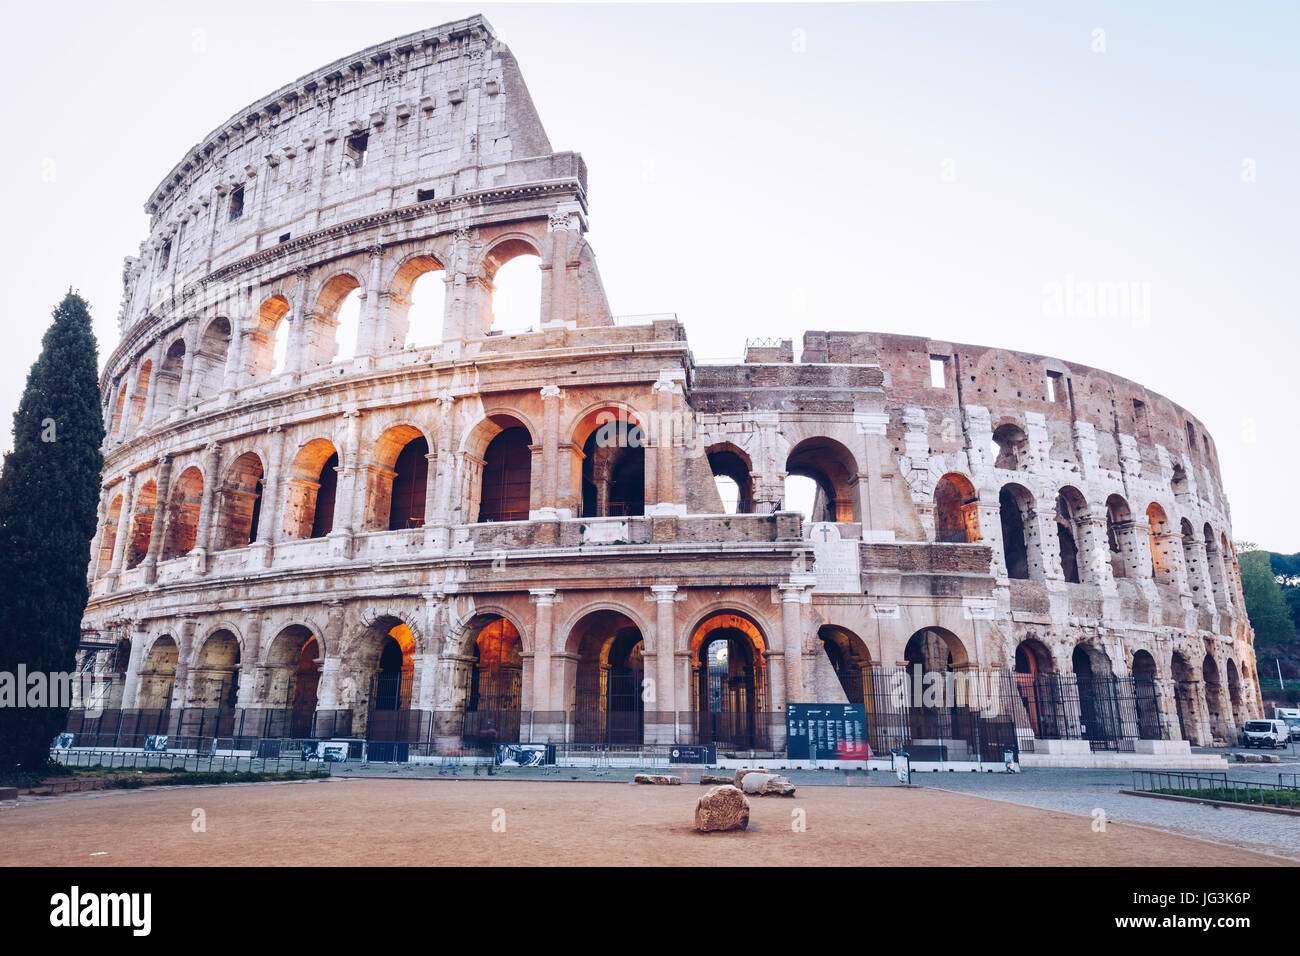 The Colosseum in the morning light. Rome, Italy Stock Photo